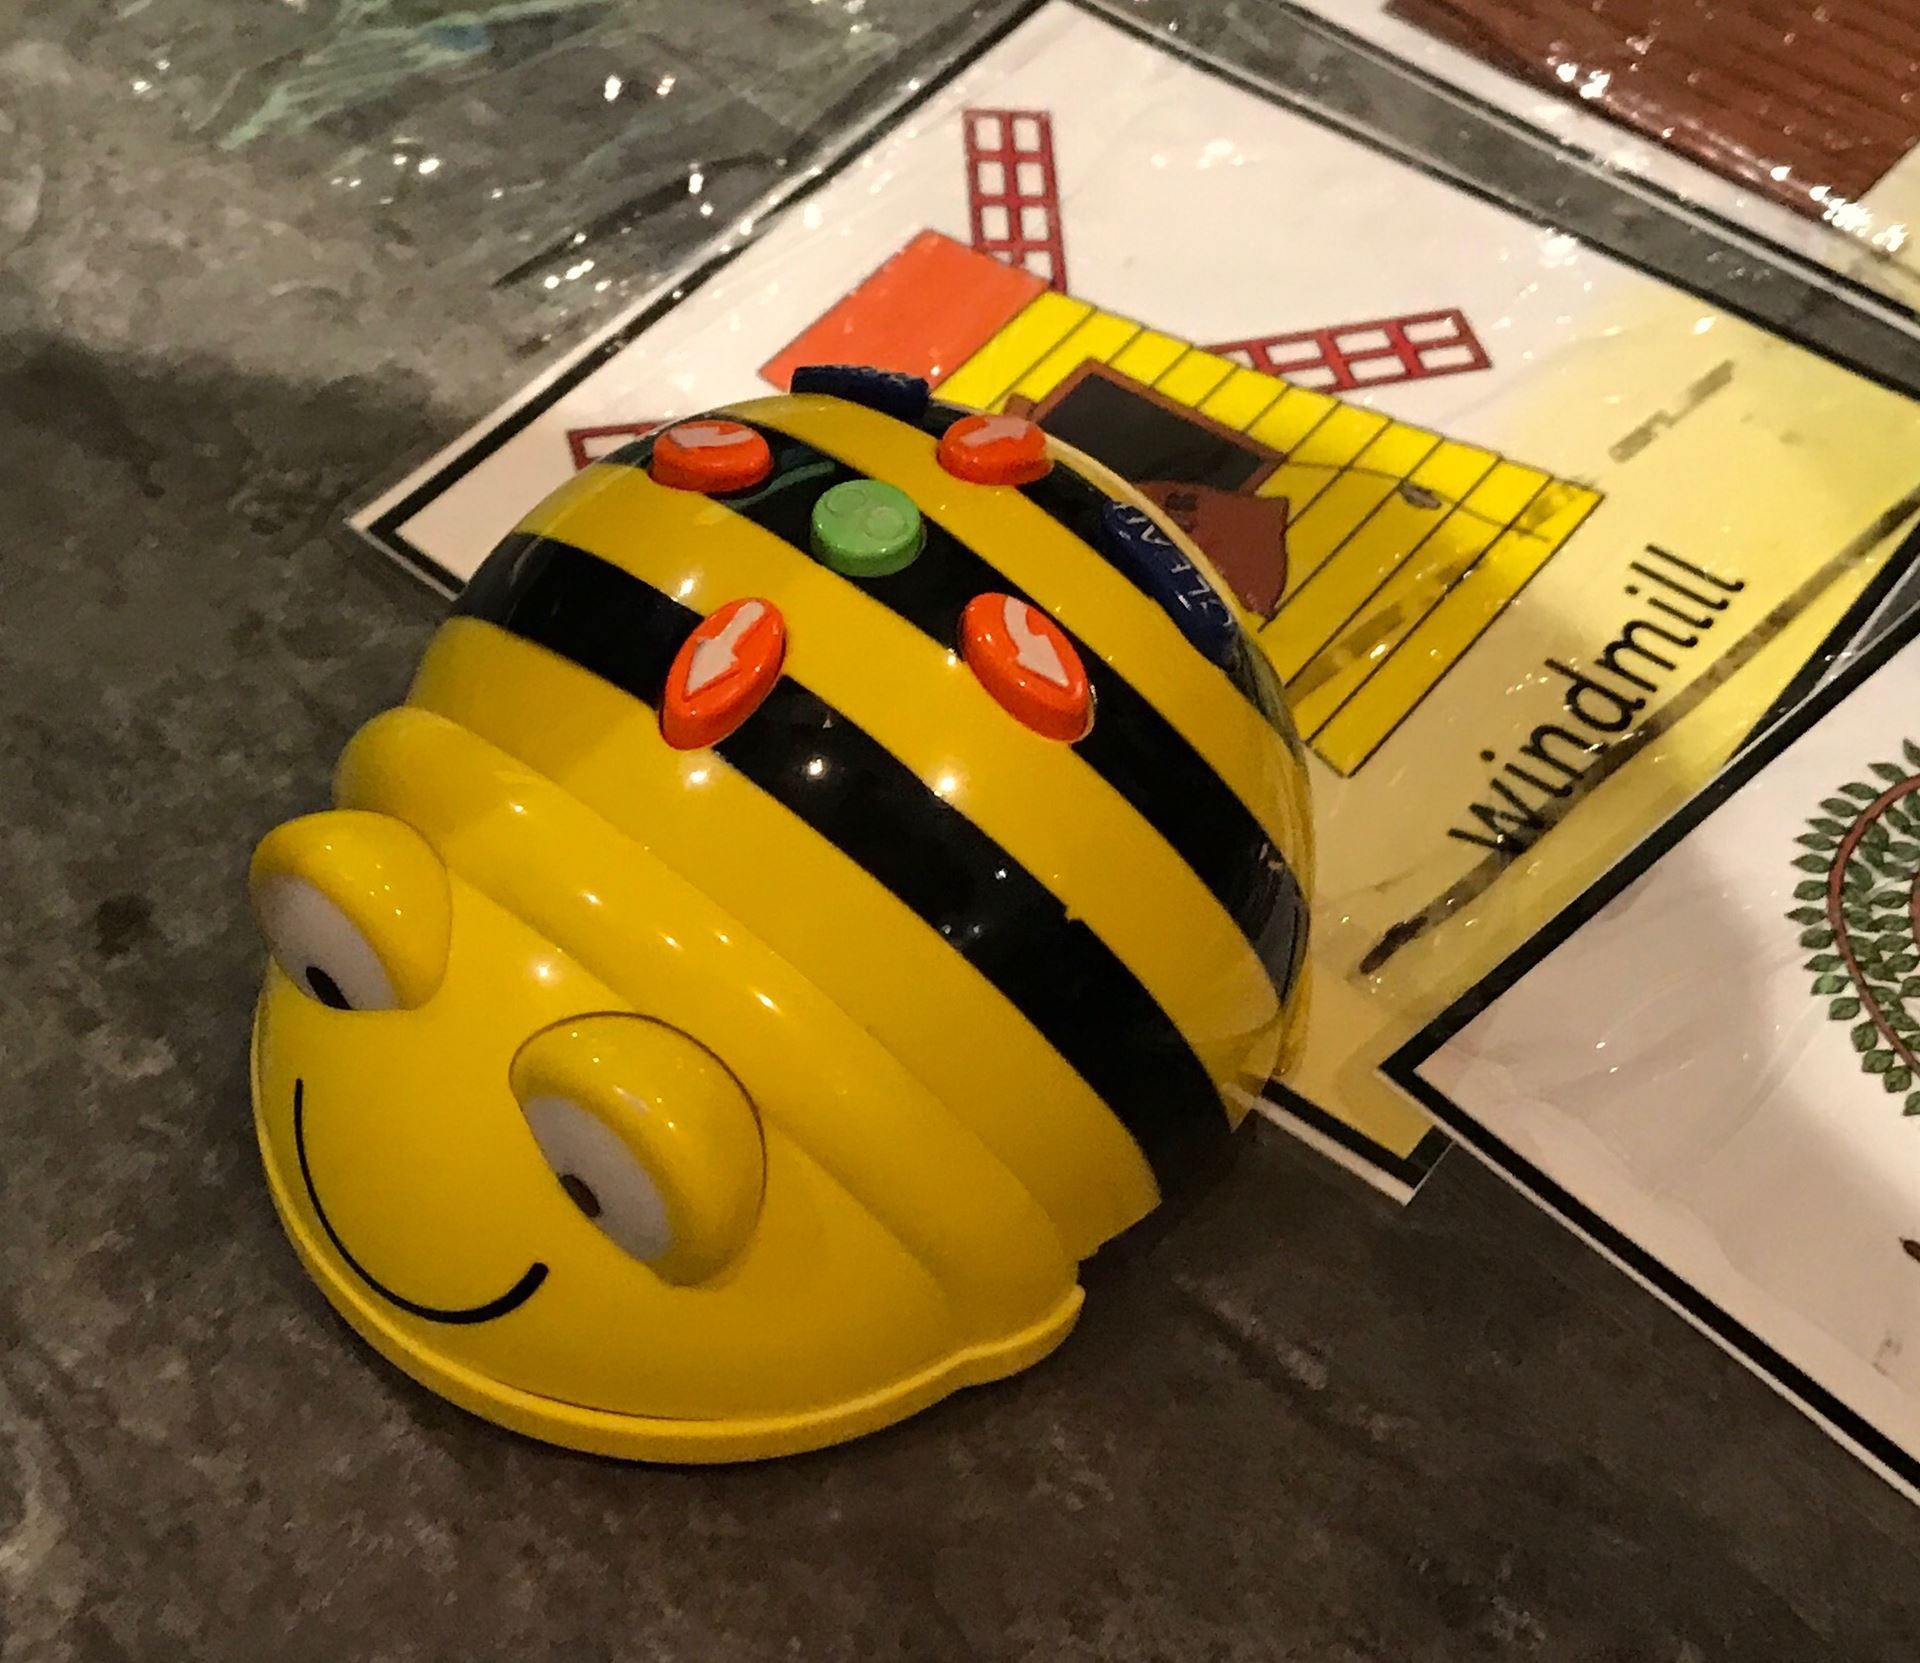 A Bee Bot sits on an activity tile